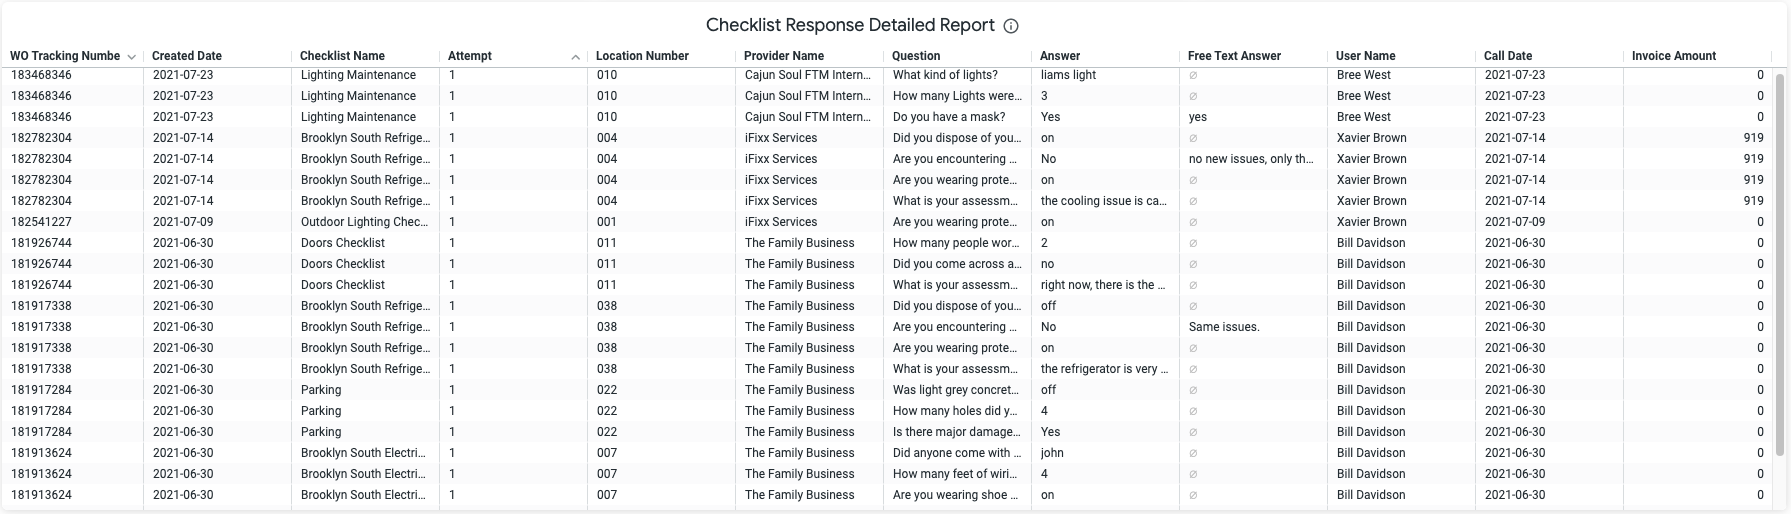 Checklist Reponse Detailed Report